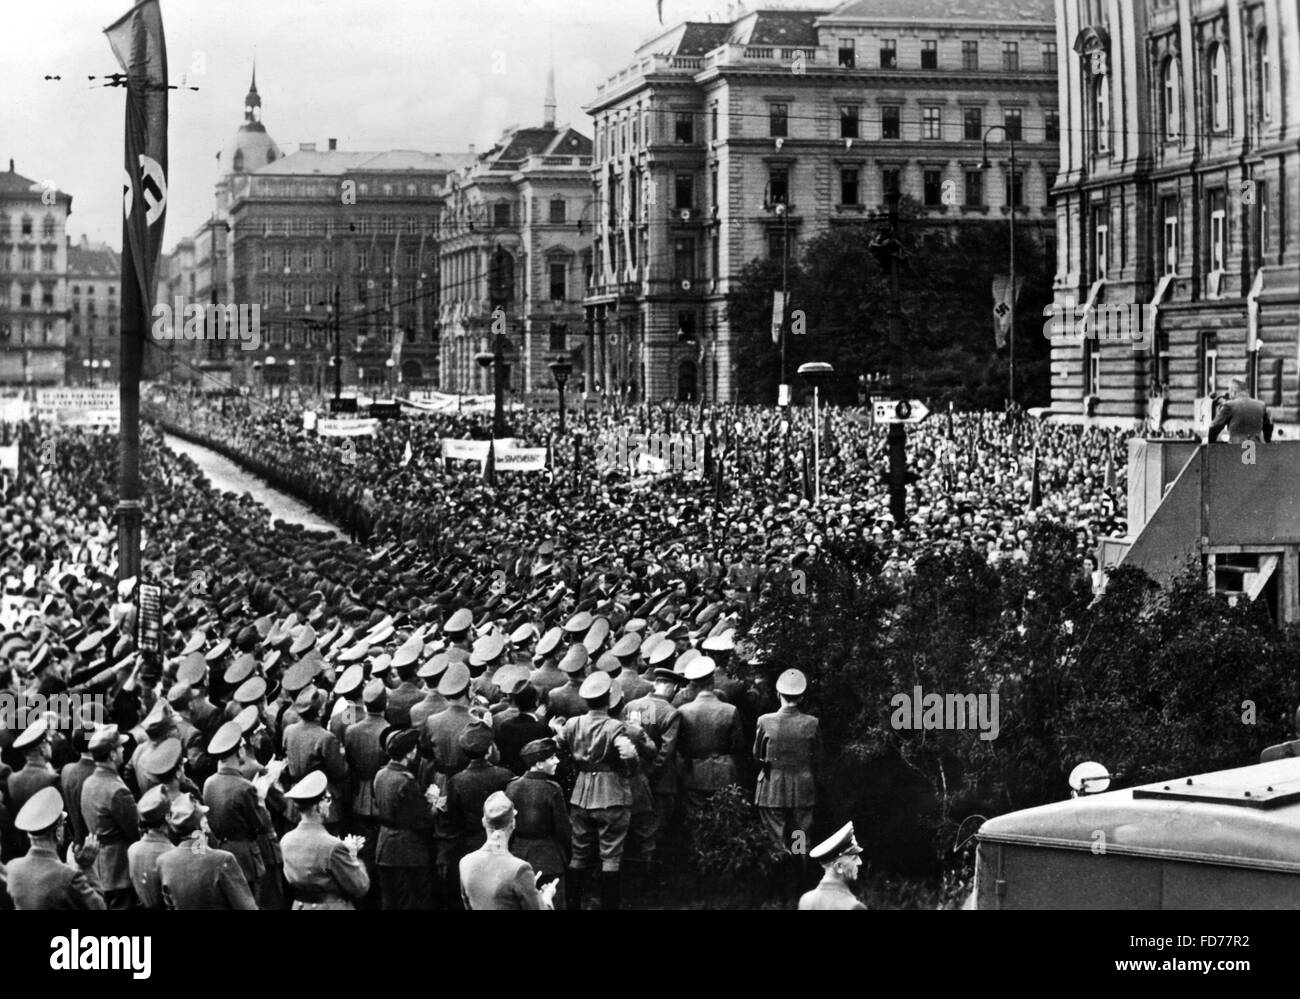 Mass event after the assassination attempt of 20 July 1944 in Vienna Stock Photo